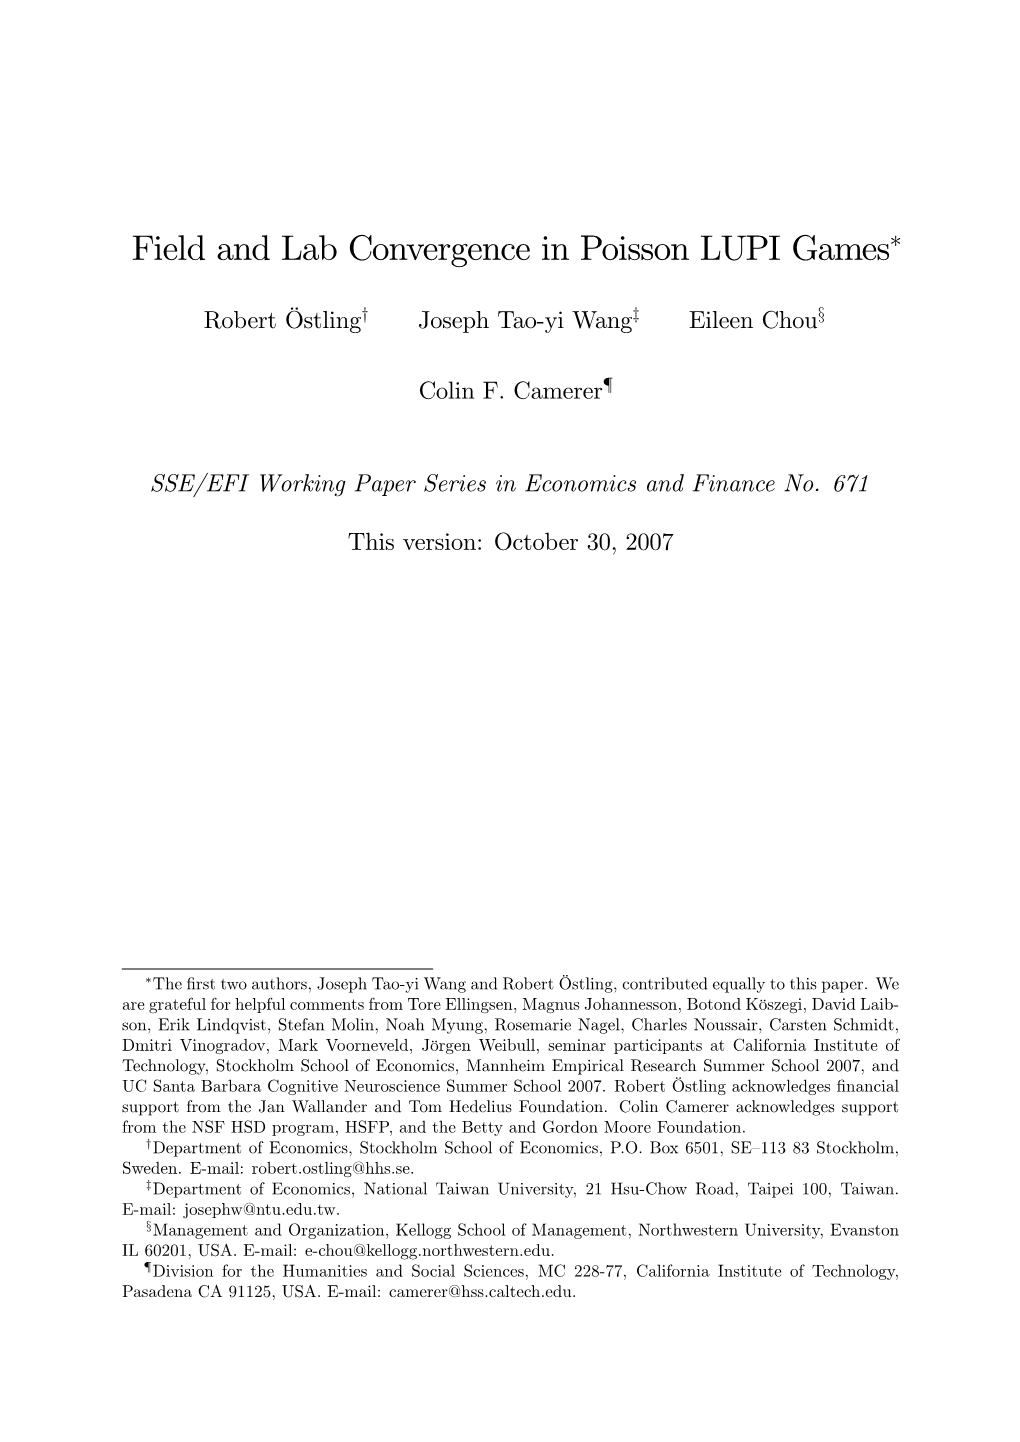 Field and Lab Convergence in Poisson LUPI Games"